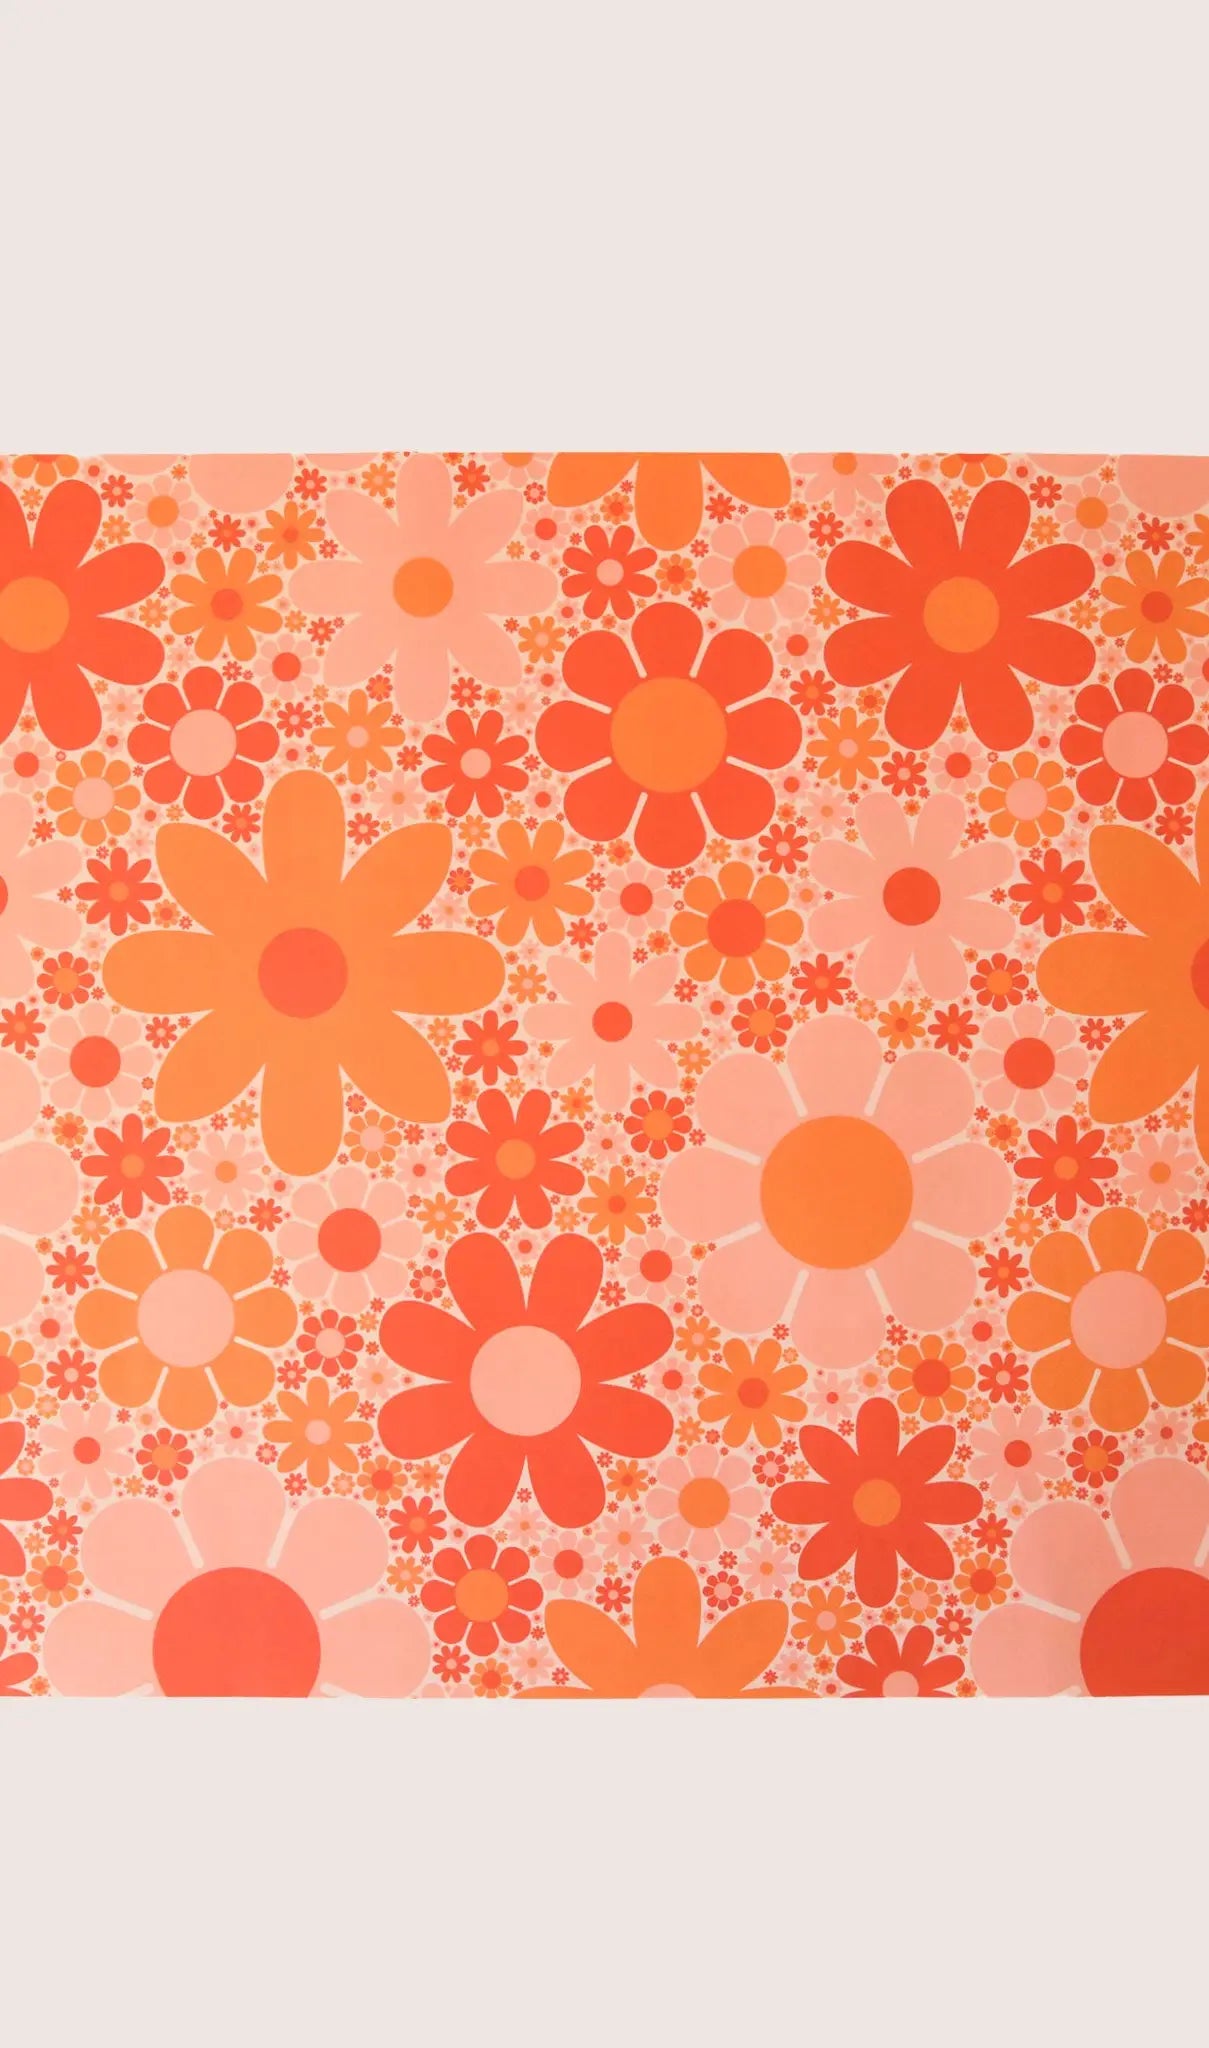 70s floral gift wrap by Sunshine Studios